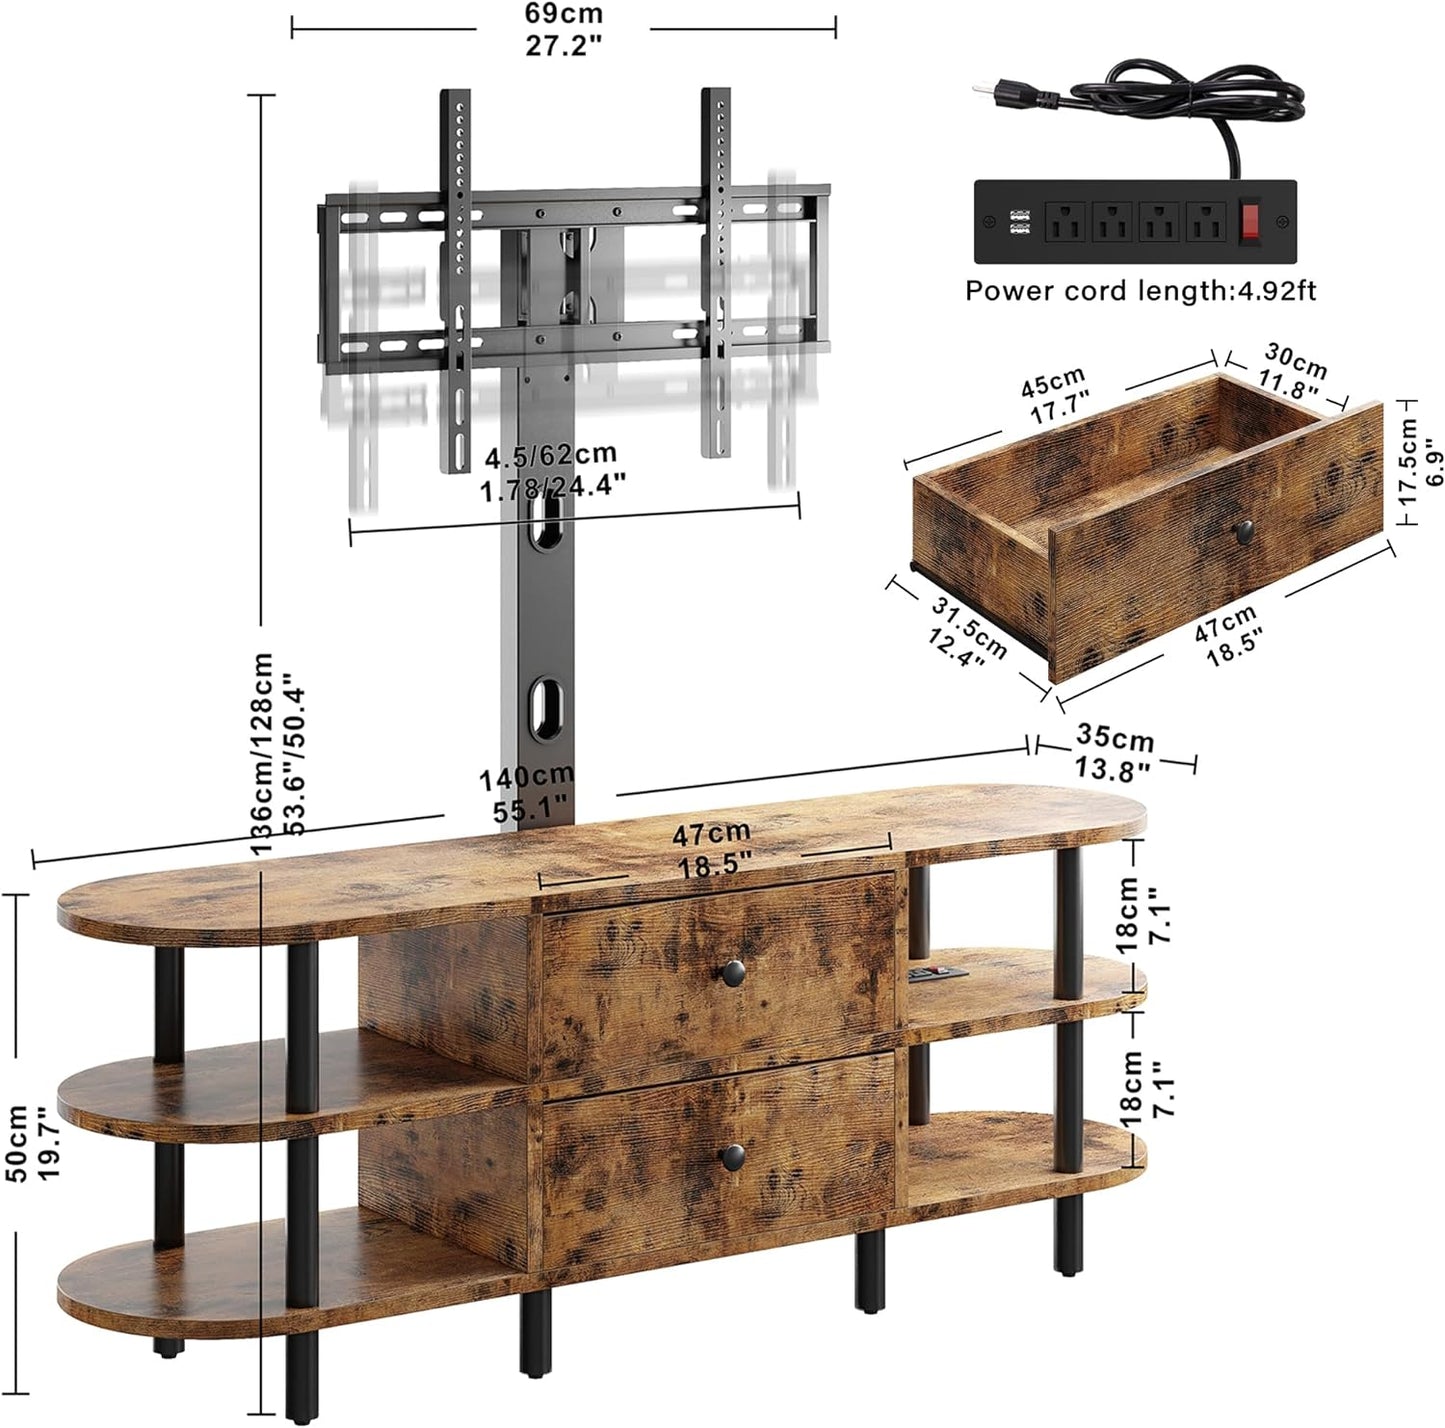 IRONCK TV Stand with Mount 47''